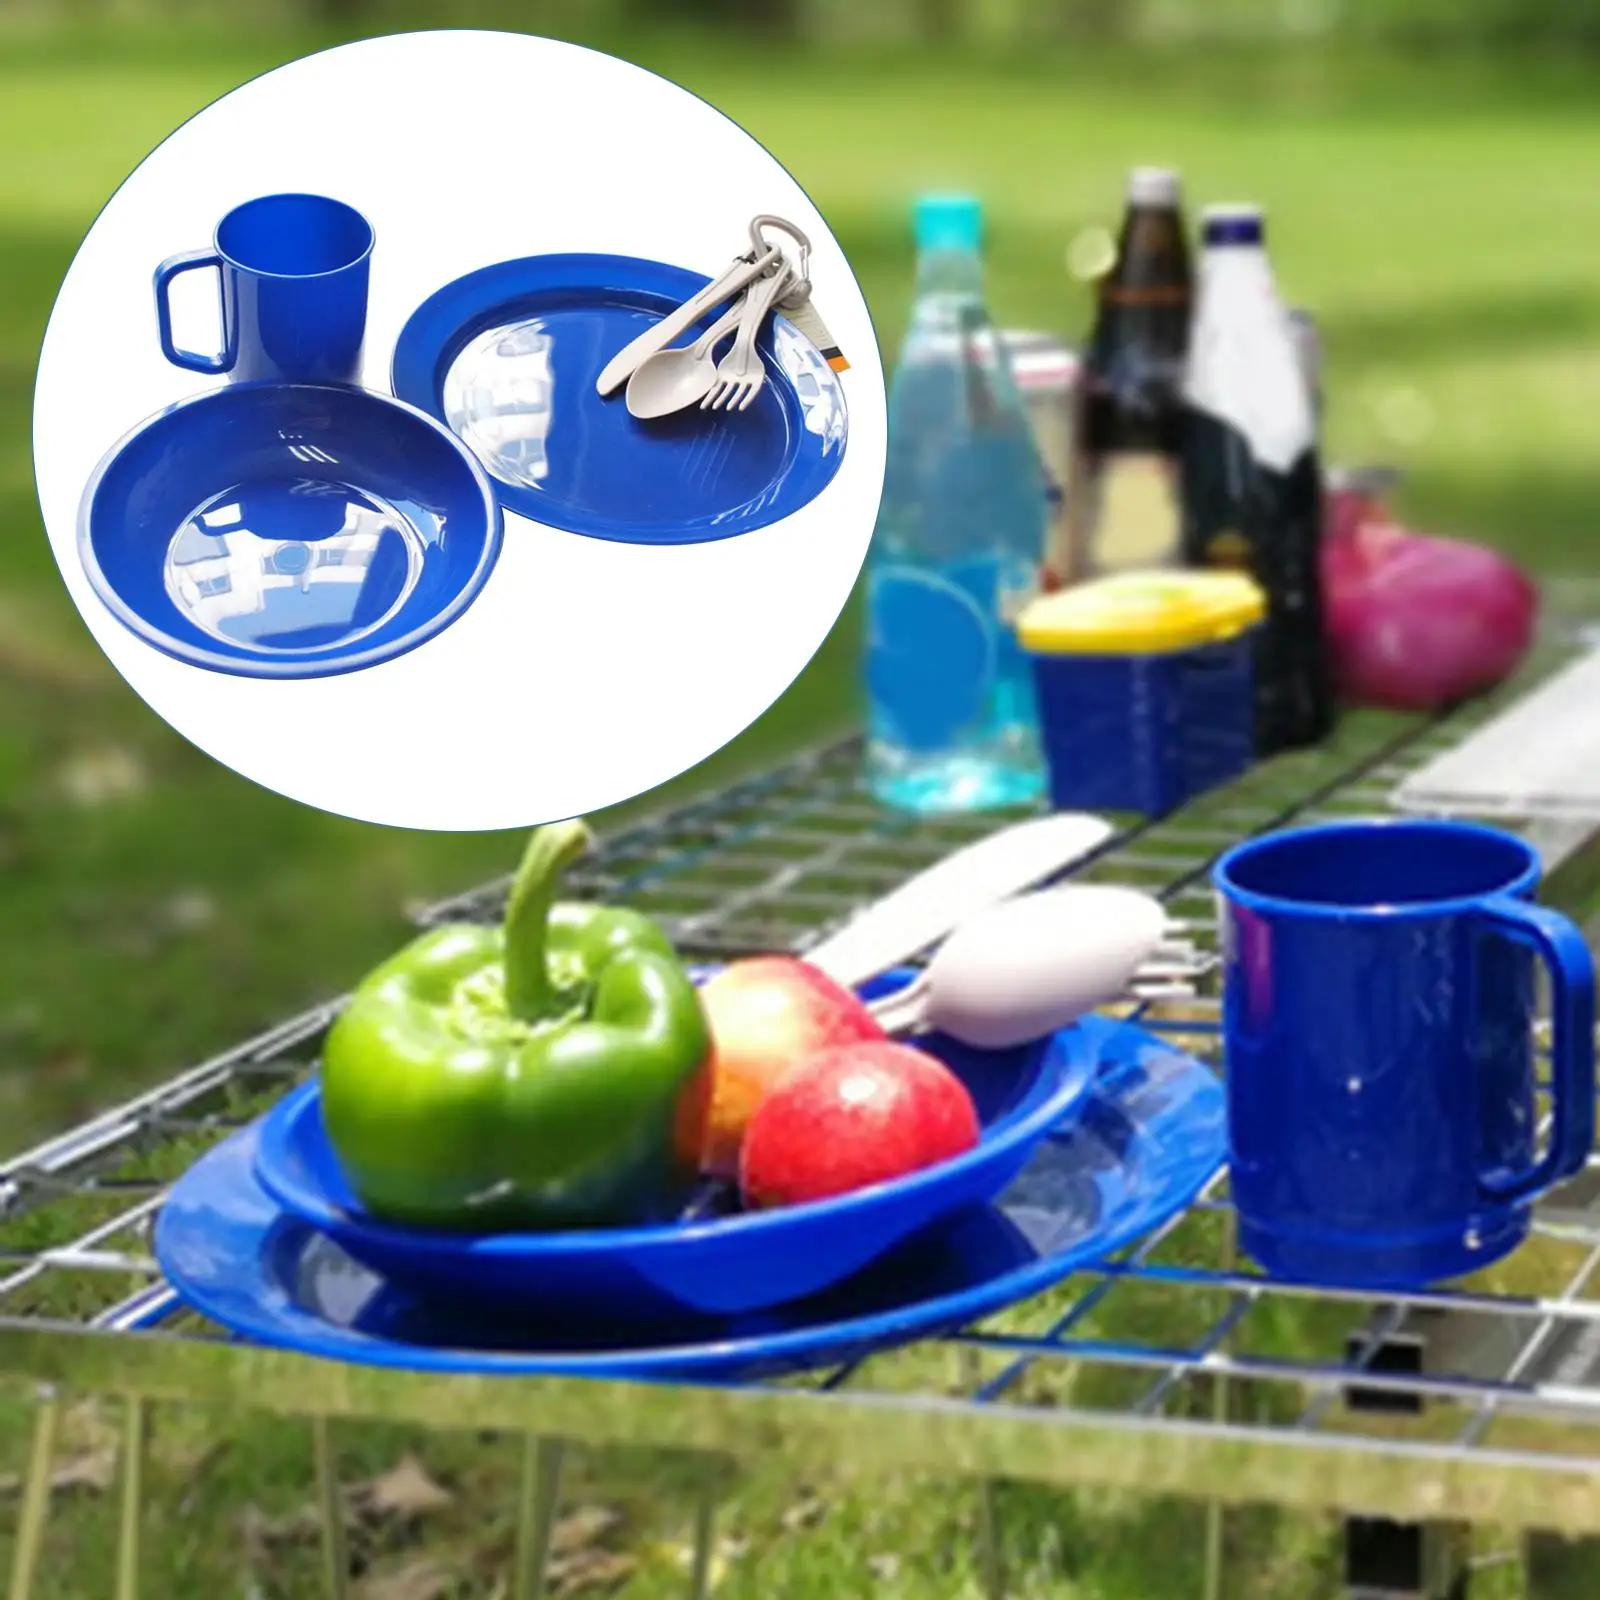 6x Outdoor Camping Tableware Set  Dish Bowl Cup Cooking Supplies for Travel Hiking